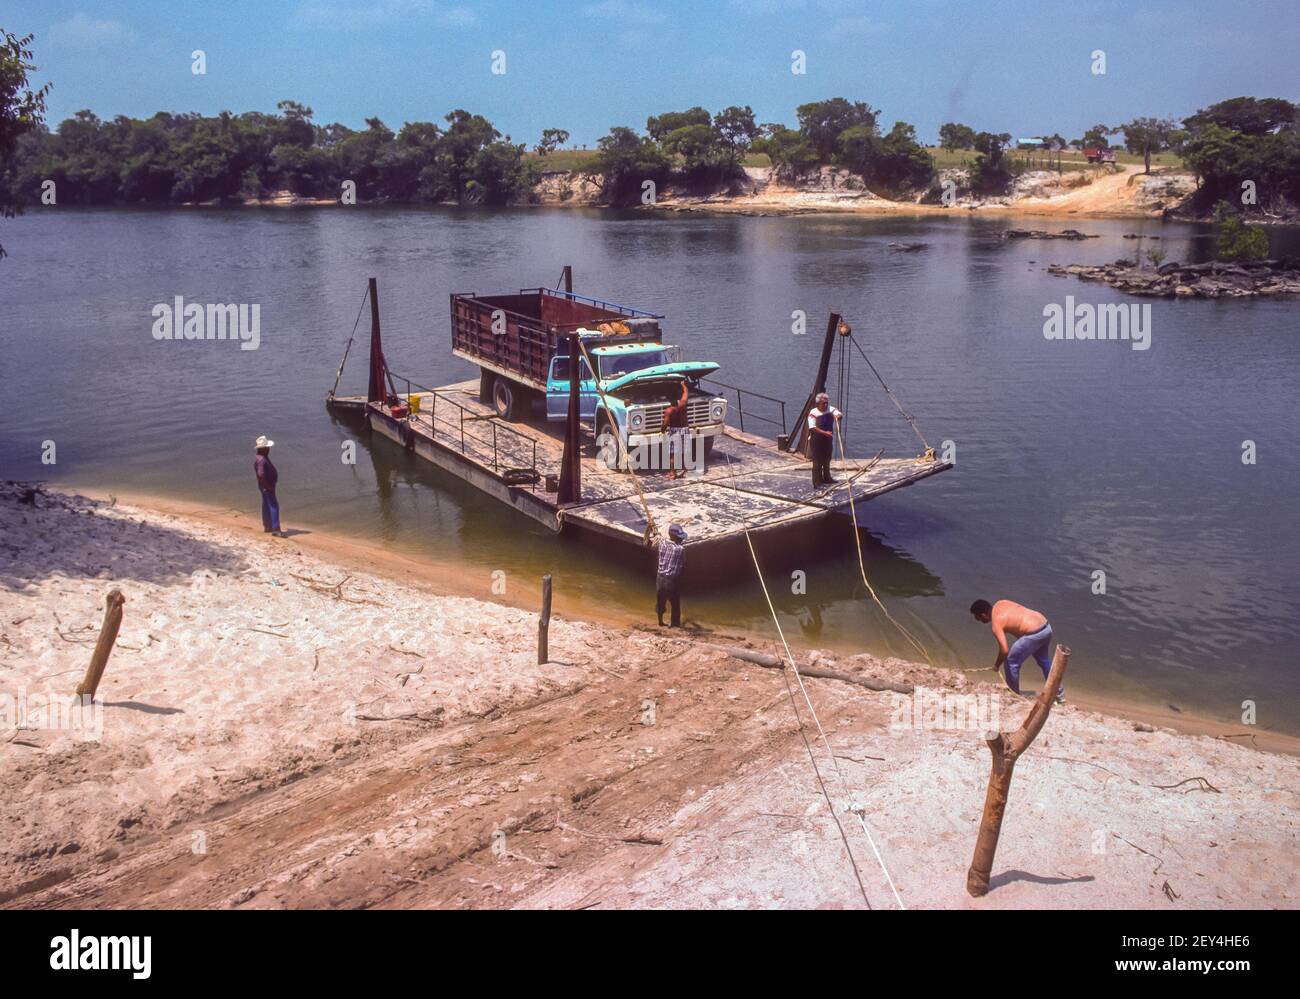 APURE STATE, VENEZUELA - Truck on river ferry pulled by hand across Cano La Pica River. Stock Photo